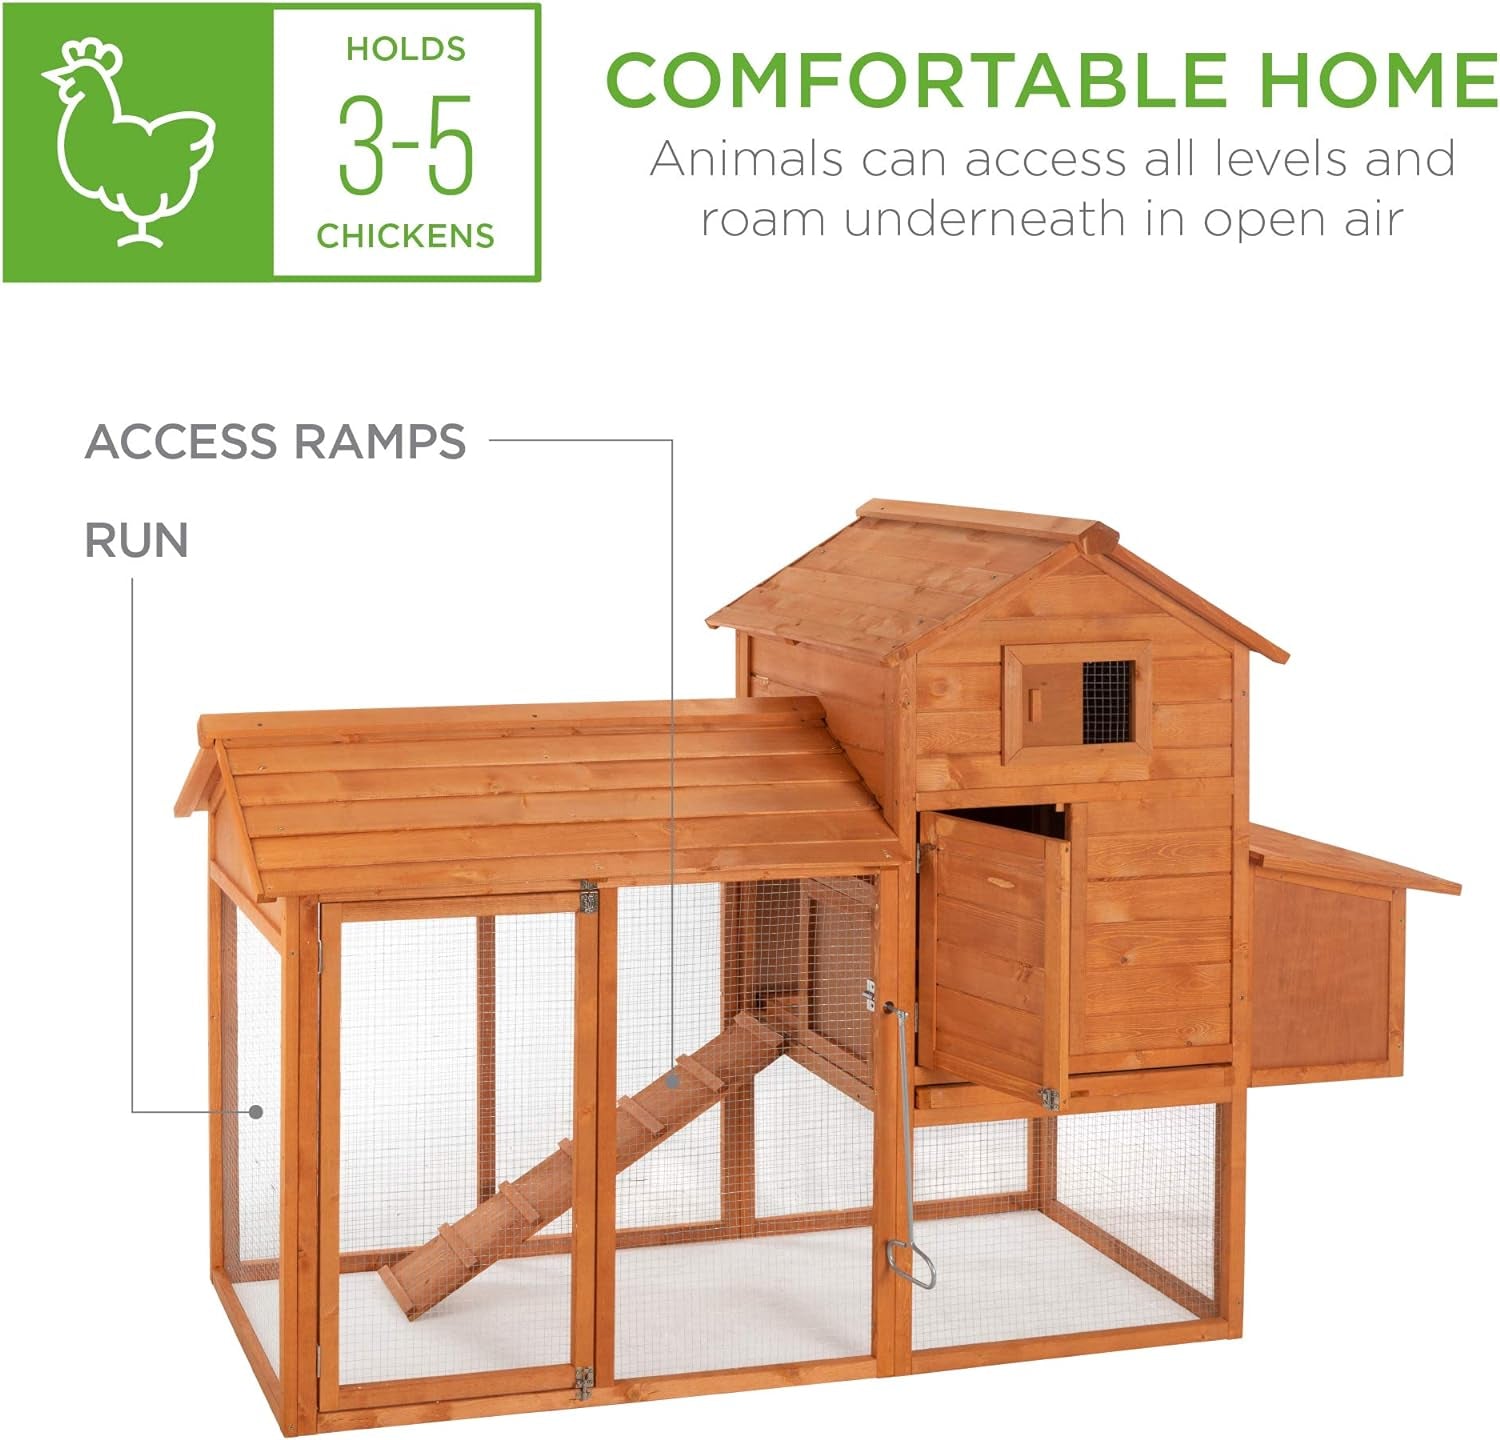 80In Outdoor Wooden Chicken Coop Multi-Level Hen House, Poultry Cage W/Ramps, Run, Nesting Box, Wire Fence, 3 Access Areas